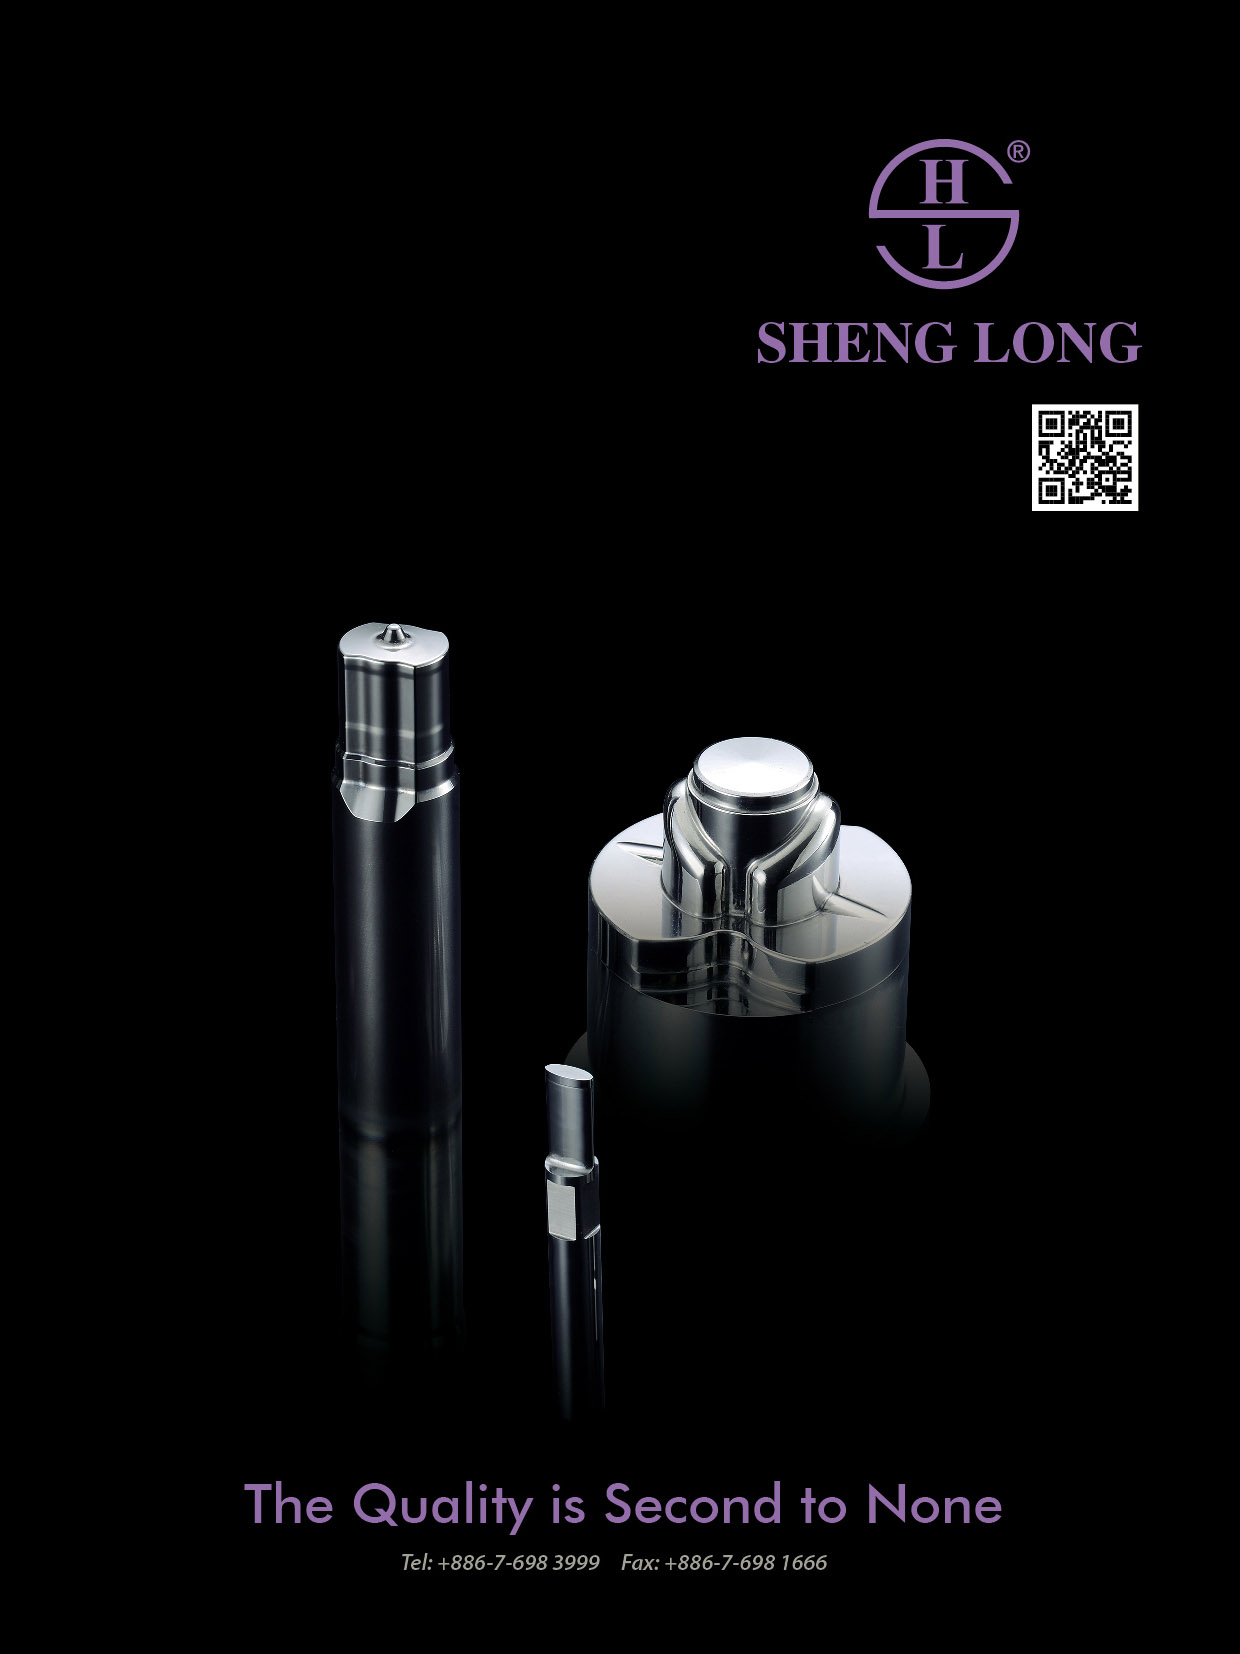 SHENG LONG INDUSTRY CO. , Punches, Pins, Sleeves, Dies, Carbide Punches, Non-standard Punches, Customized Tools